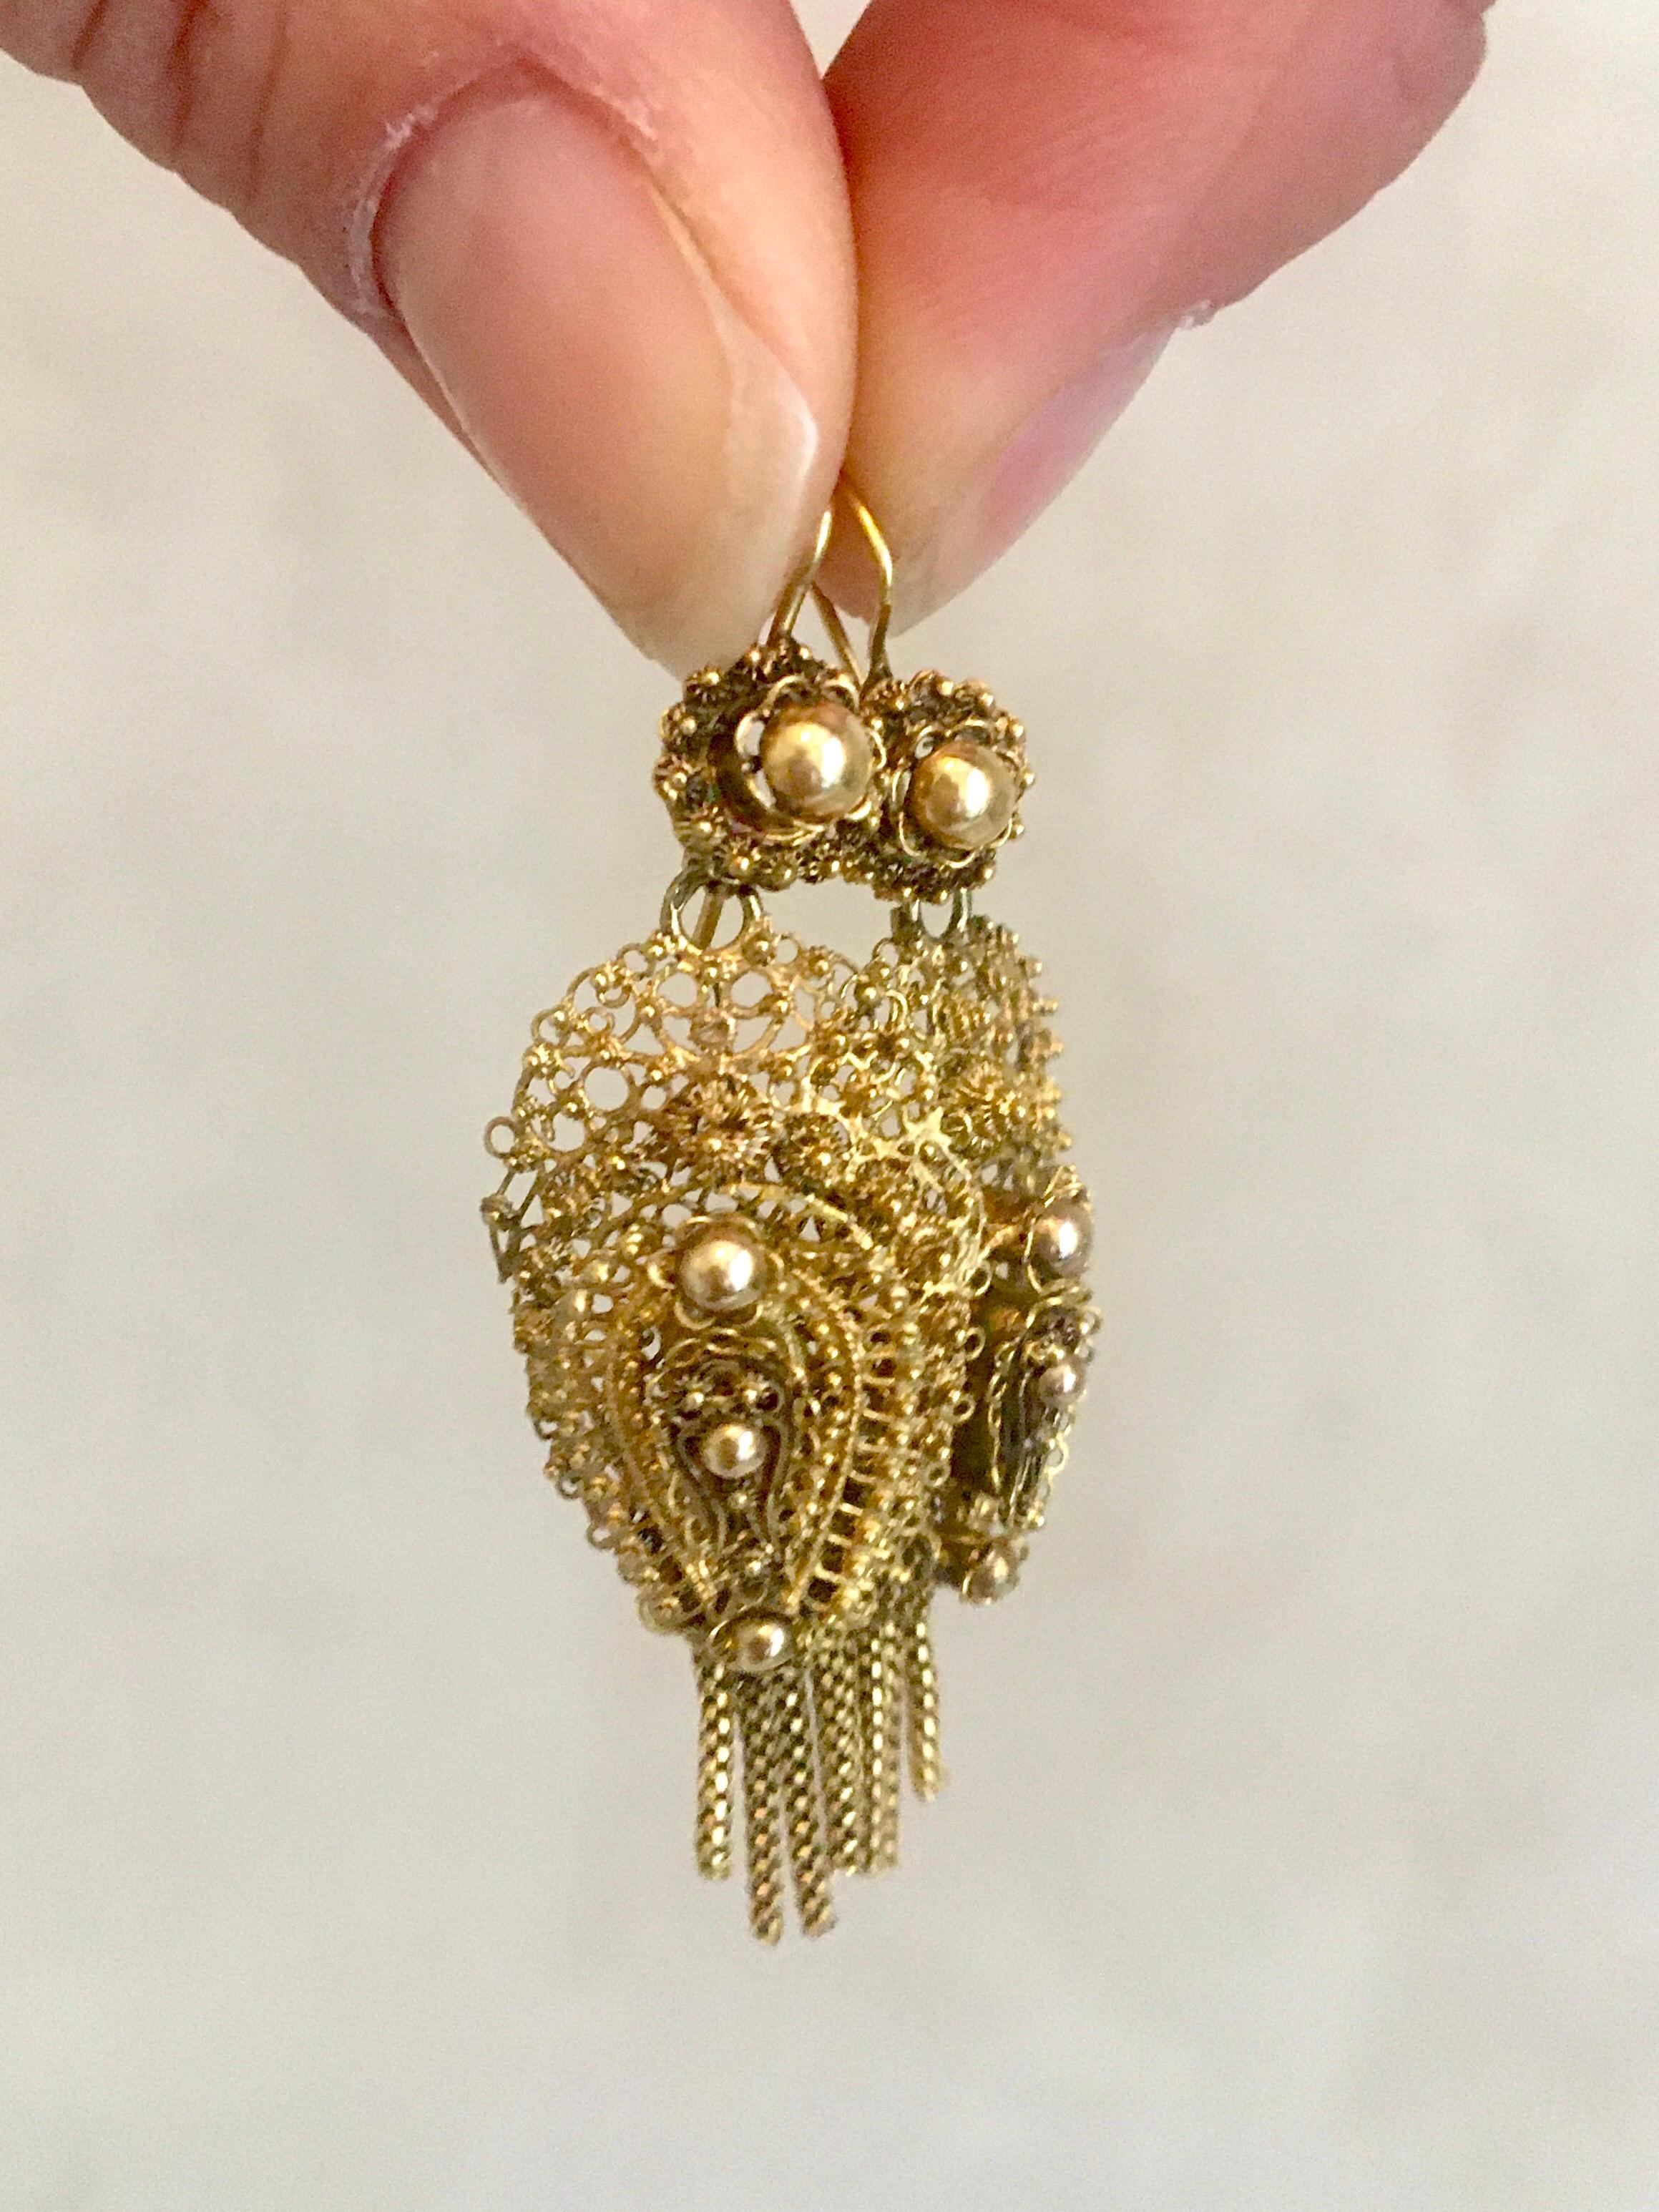 Antique 1880's 14K Gold Filigree Earrings and Brooch For Sale 4